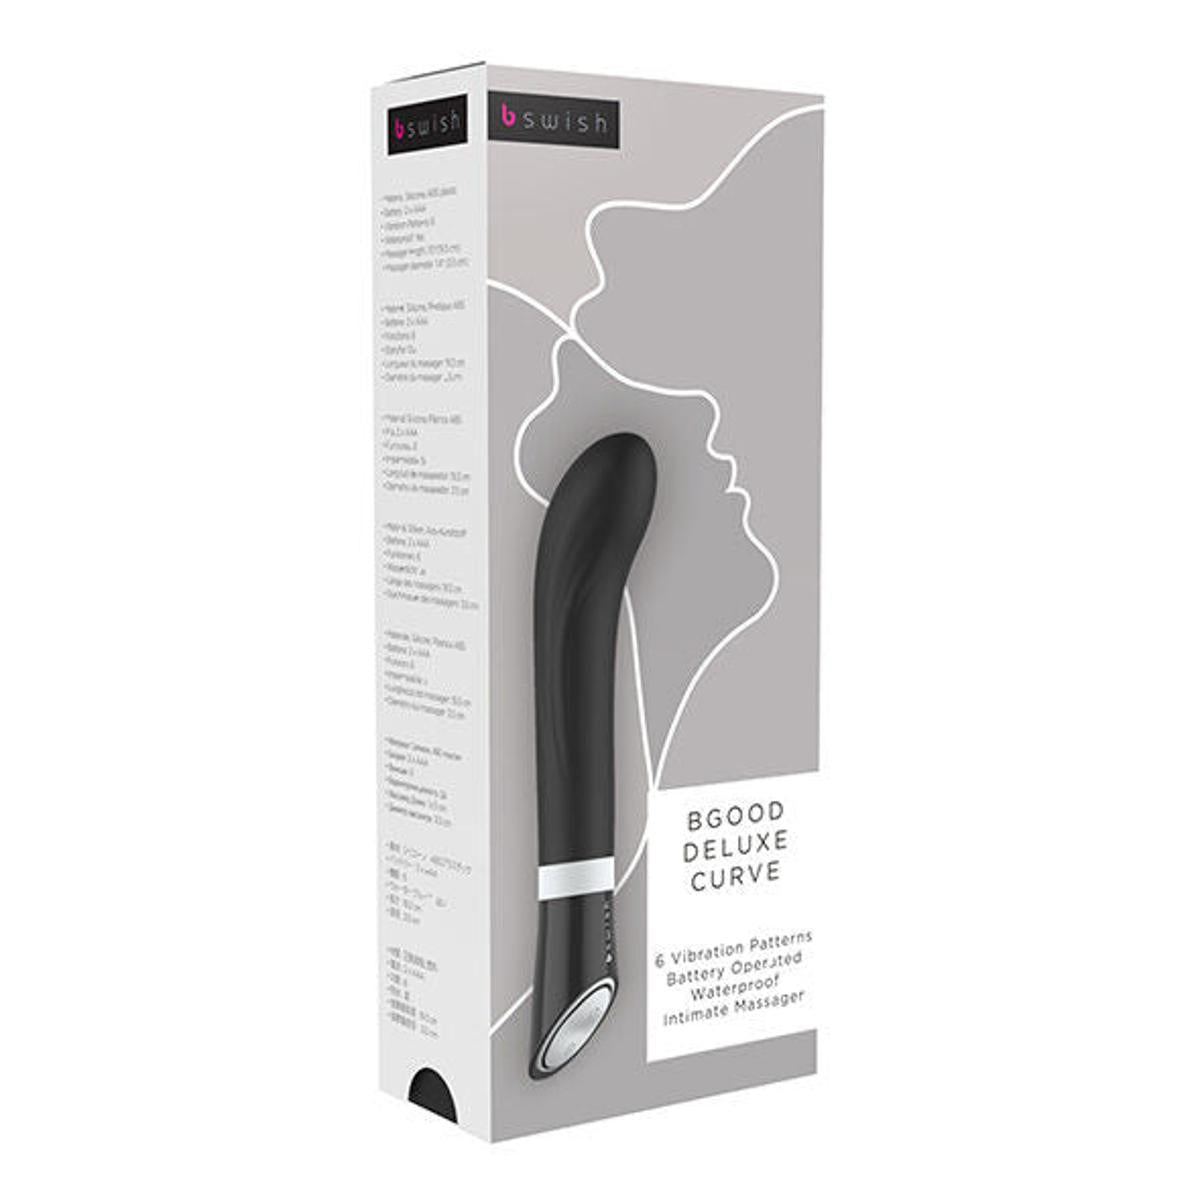 G-Punkt Vibrator "B-Good Deluxe Curve" - OH MY! FANTASY